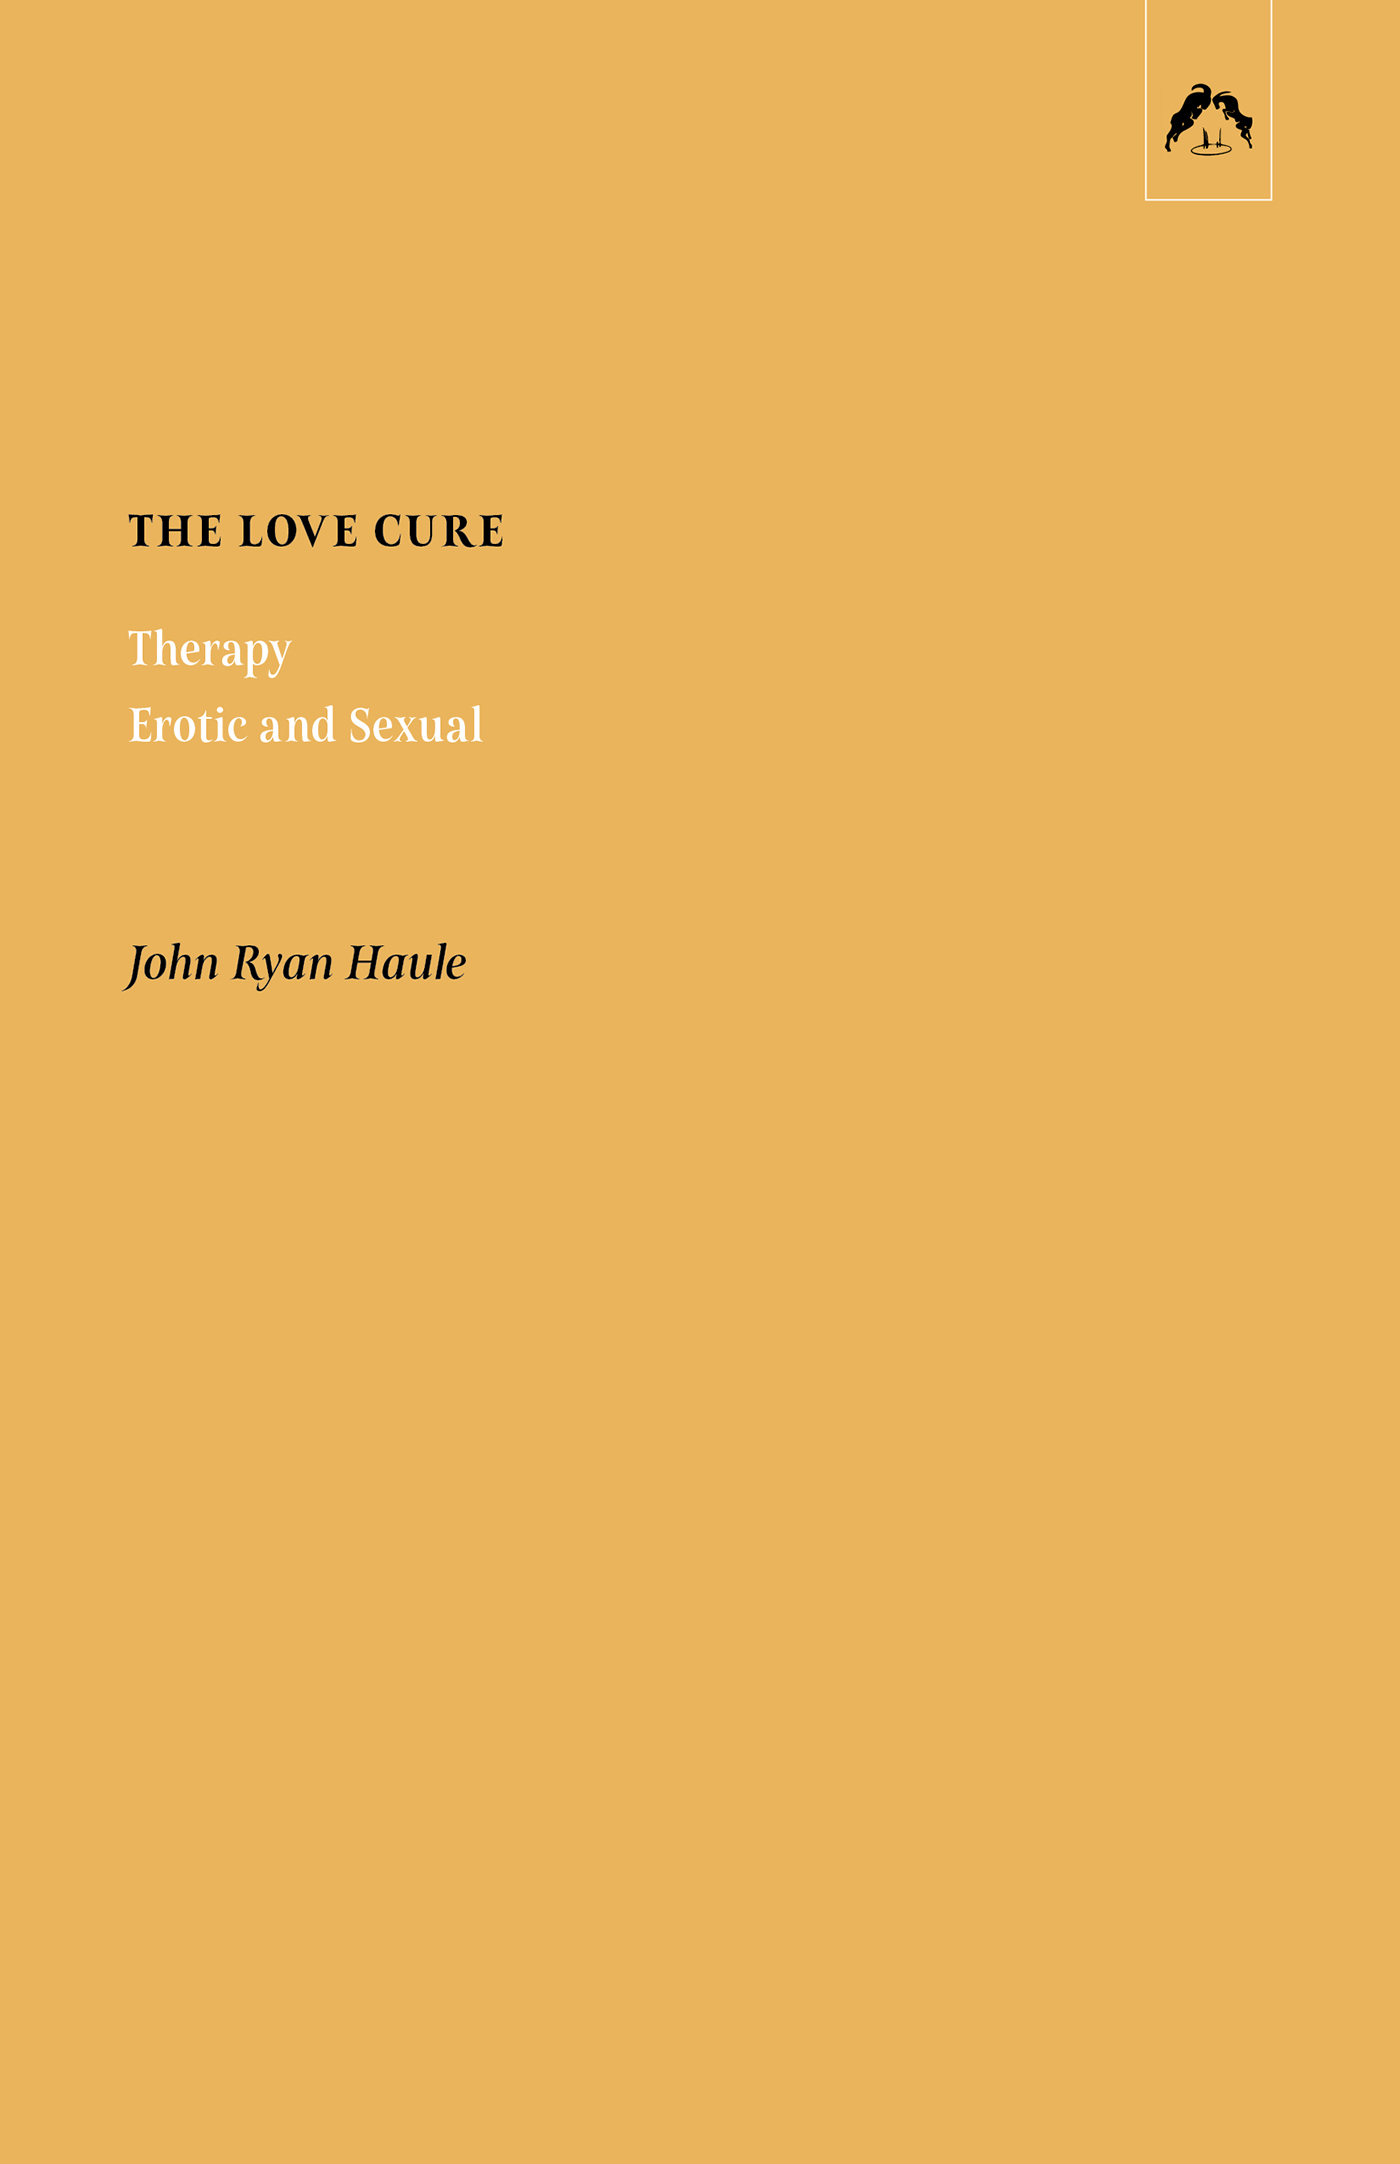 LOVE CURE book cover